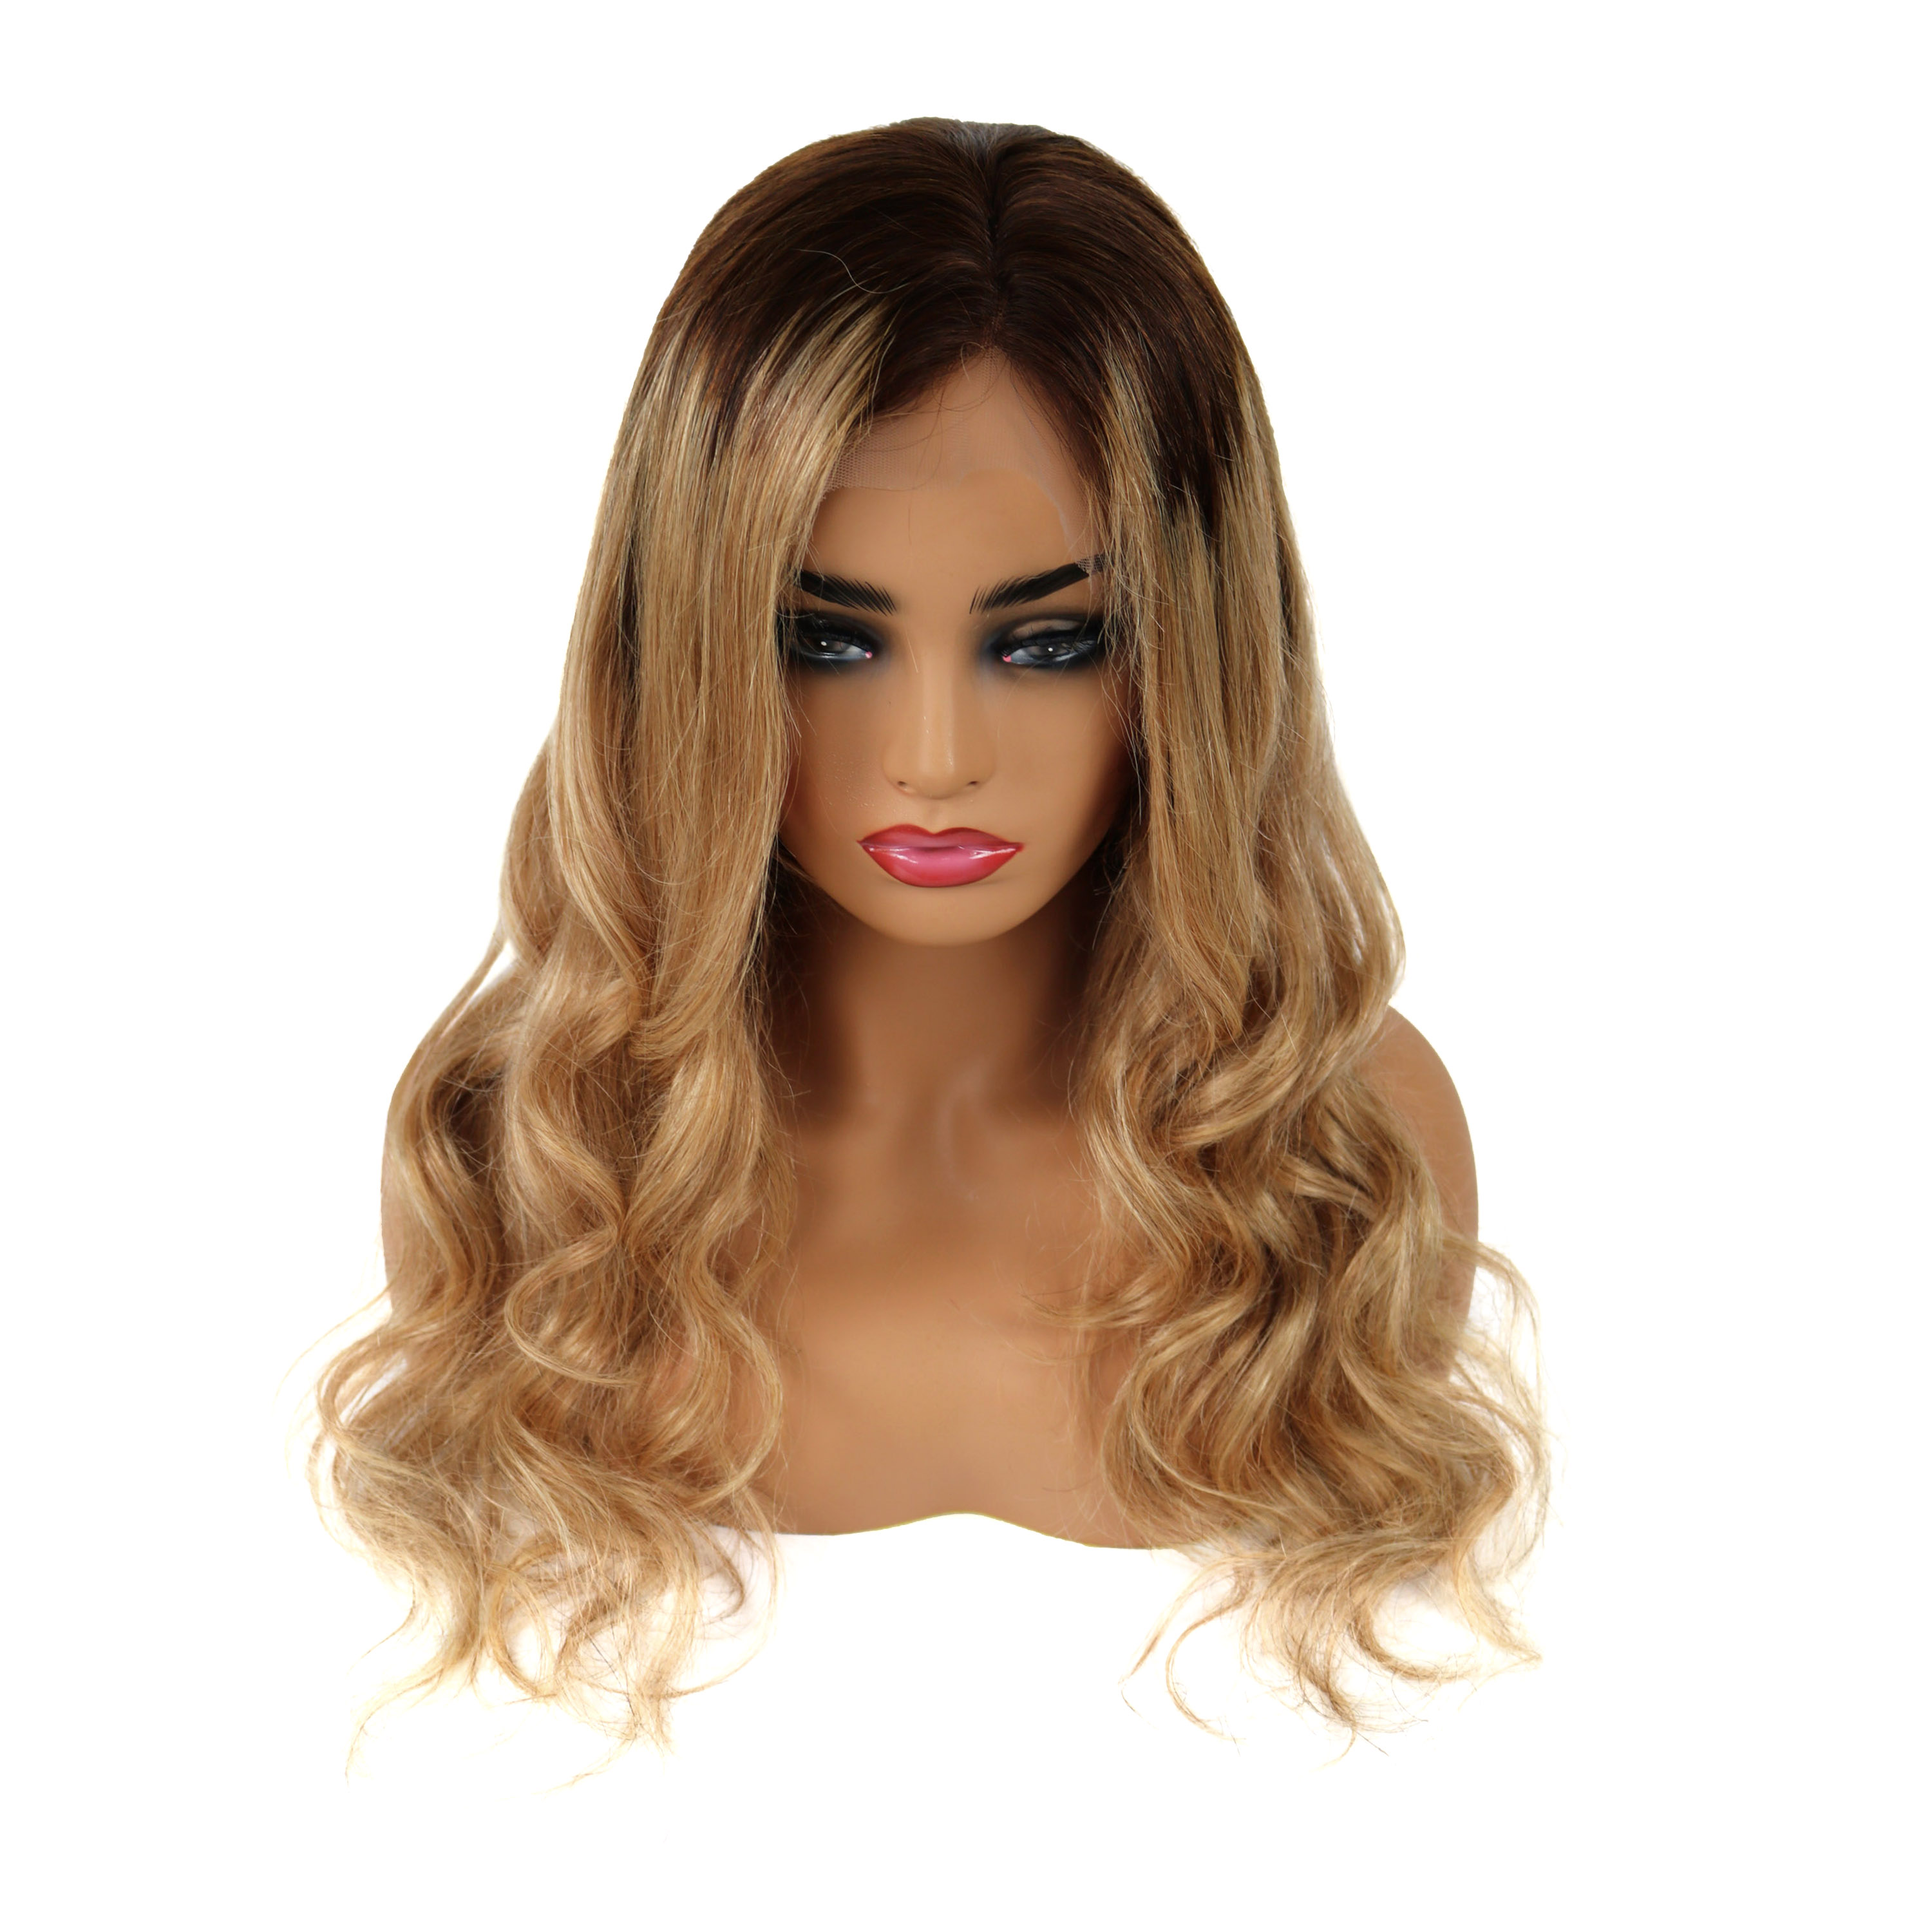 Lace Front Cap Human Hair Wavy 120% 22 Inches Wigs